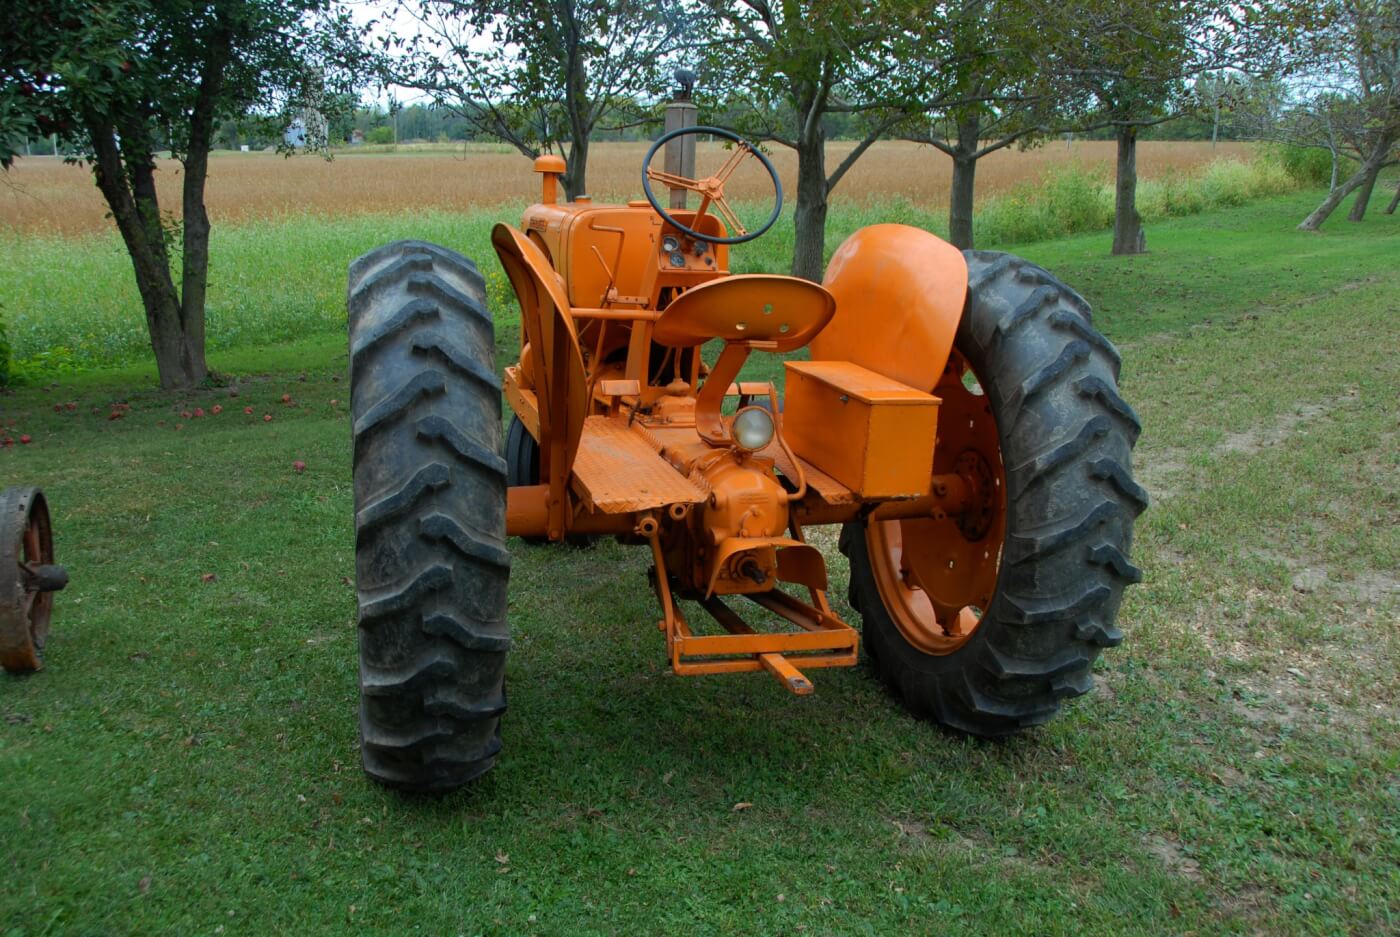 The working end shows a swinging drawbar and the rear PTO. A 3-point hydraulic hitch was optional and all hookups were universal so that a variety of implements could be used.